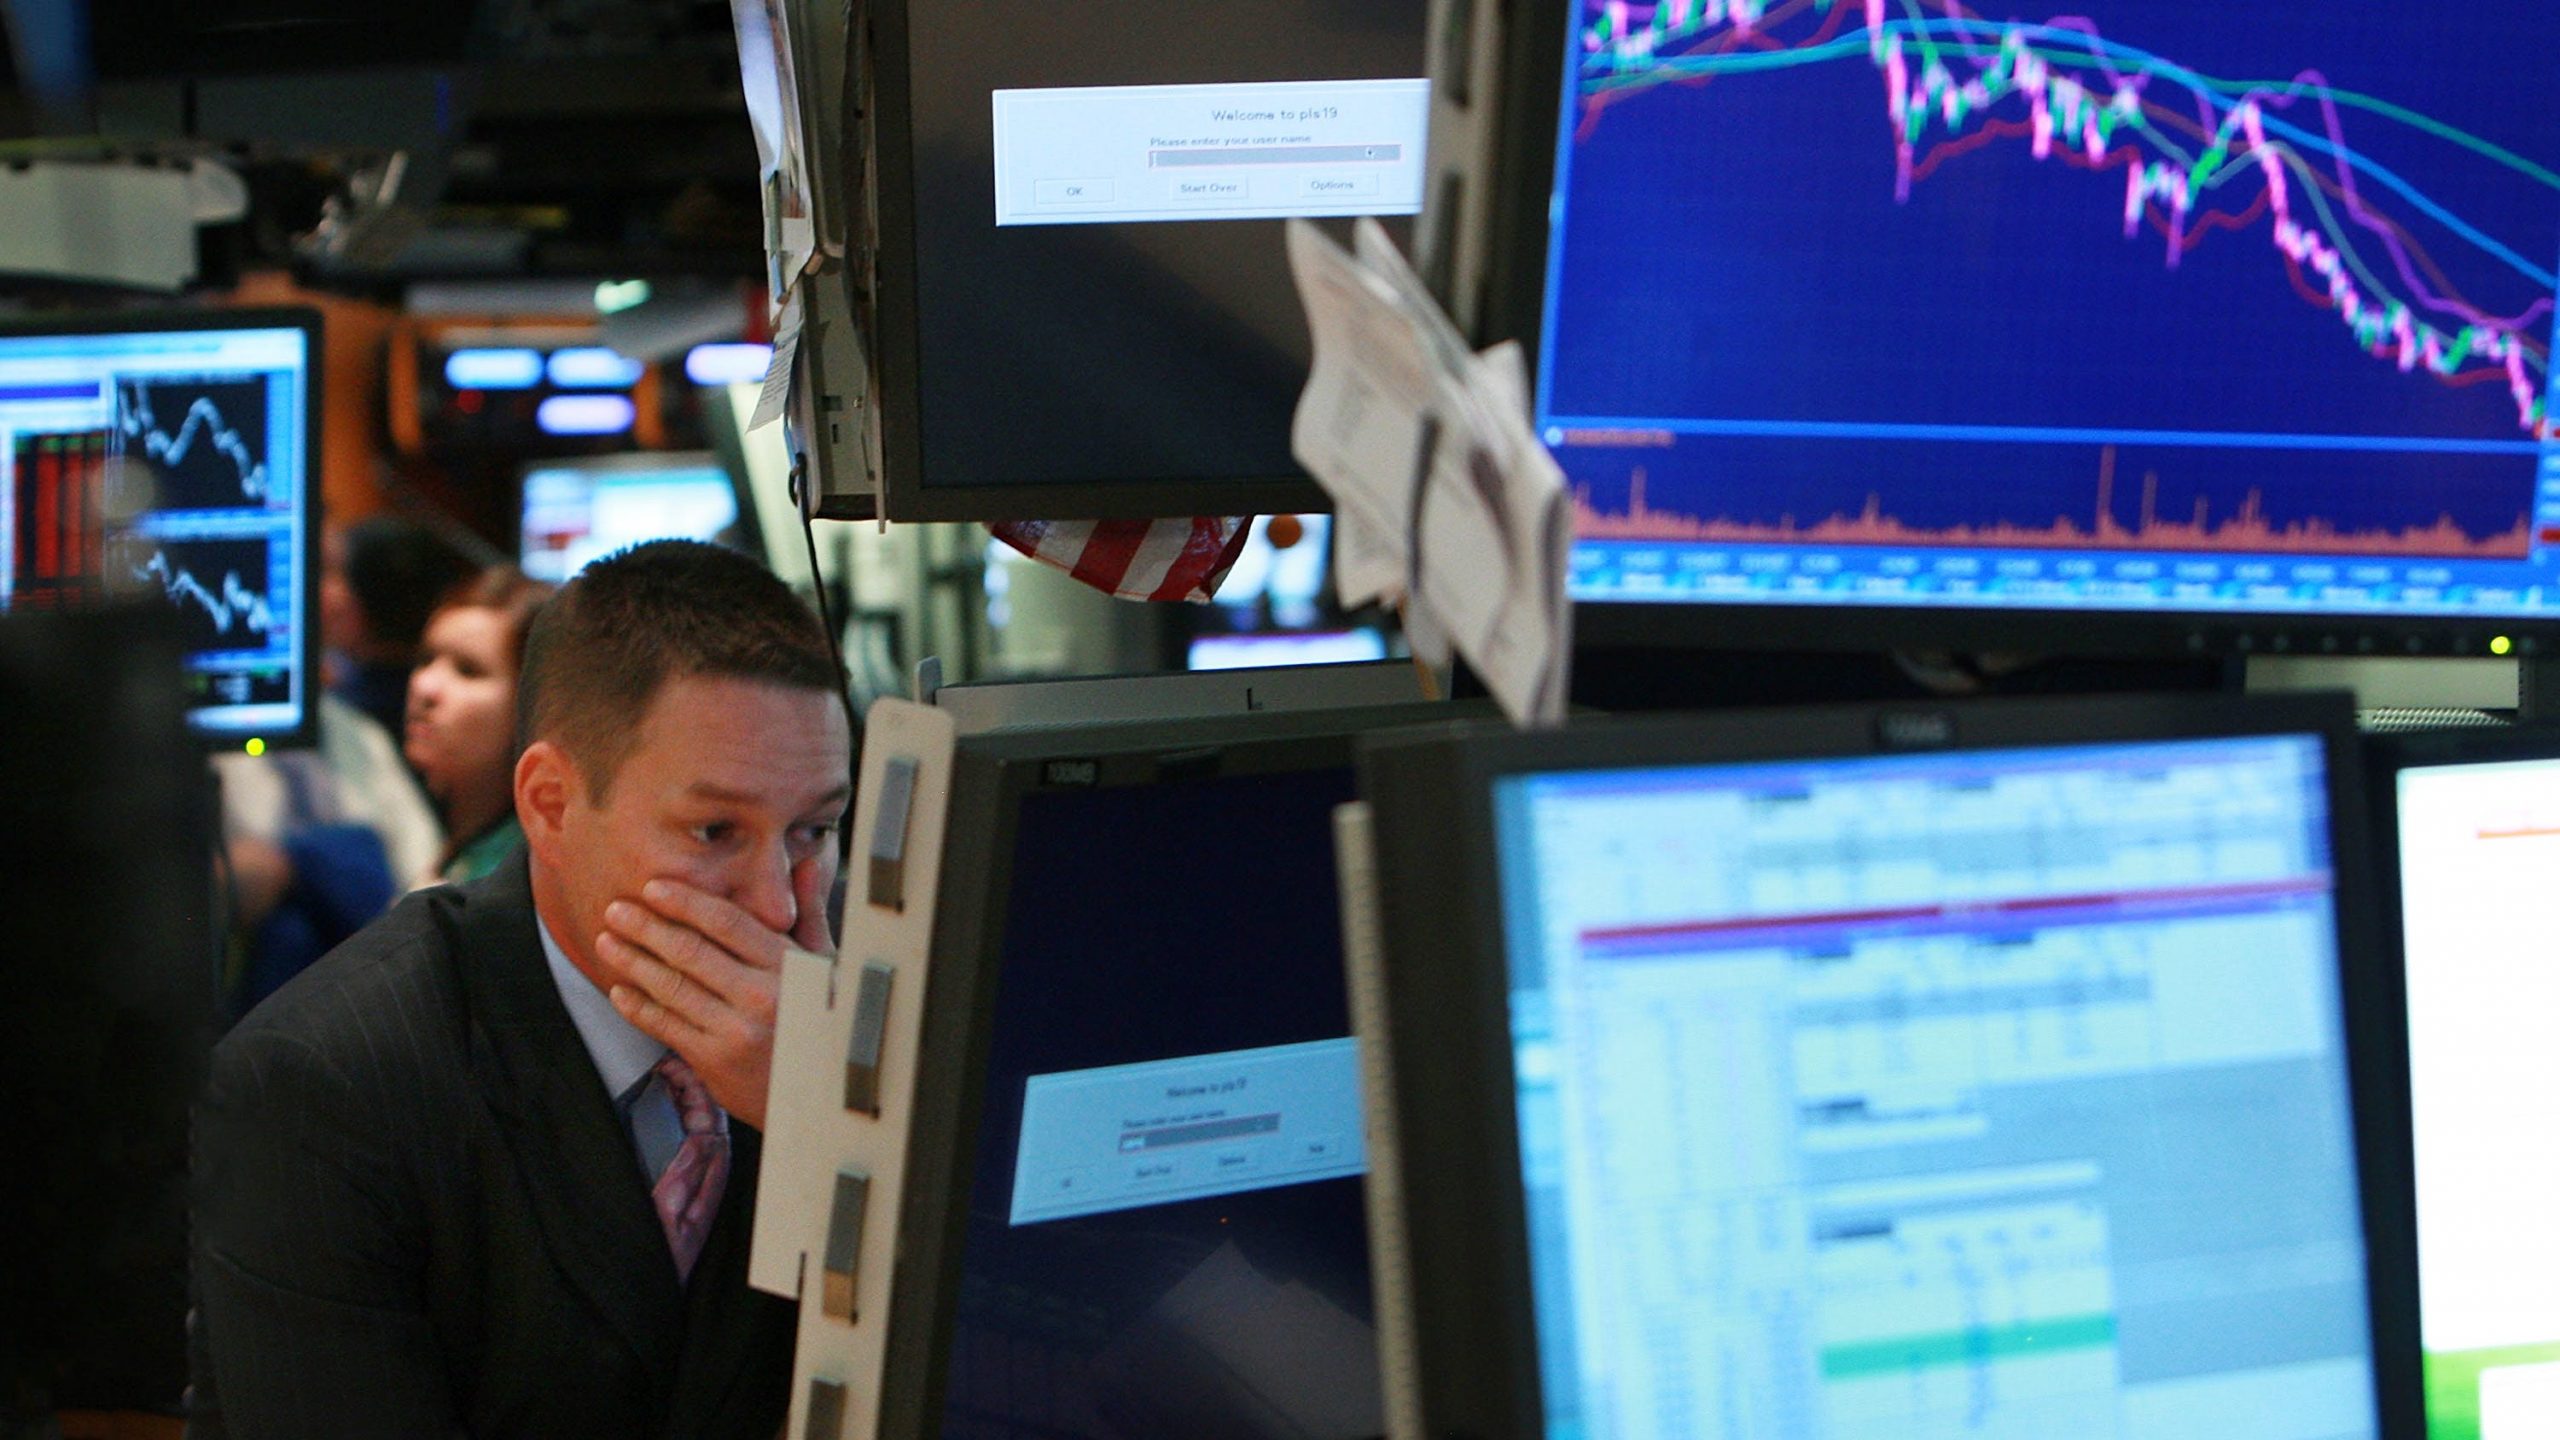 Global Markets Are Partying Like It Is 2008 (But a Crash Is Coming) By Desmond Lachman